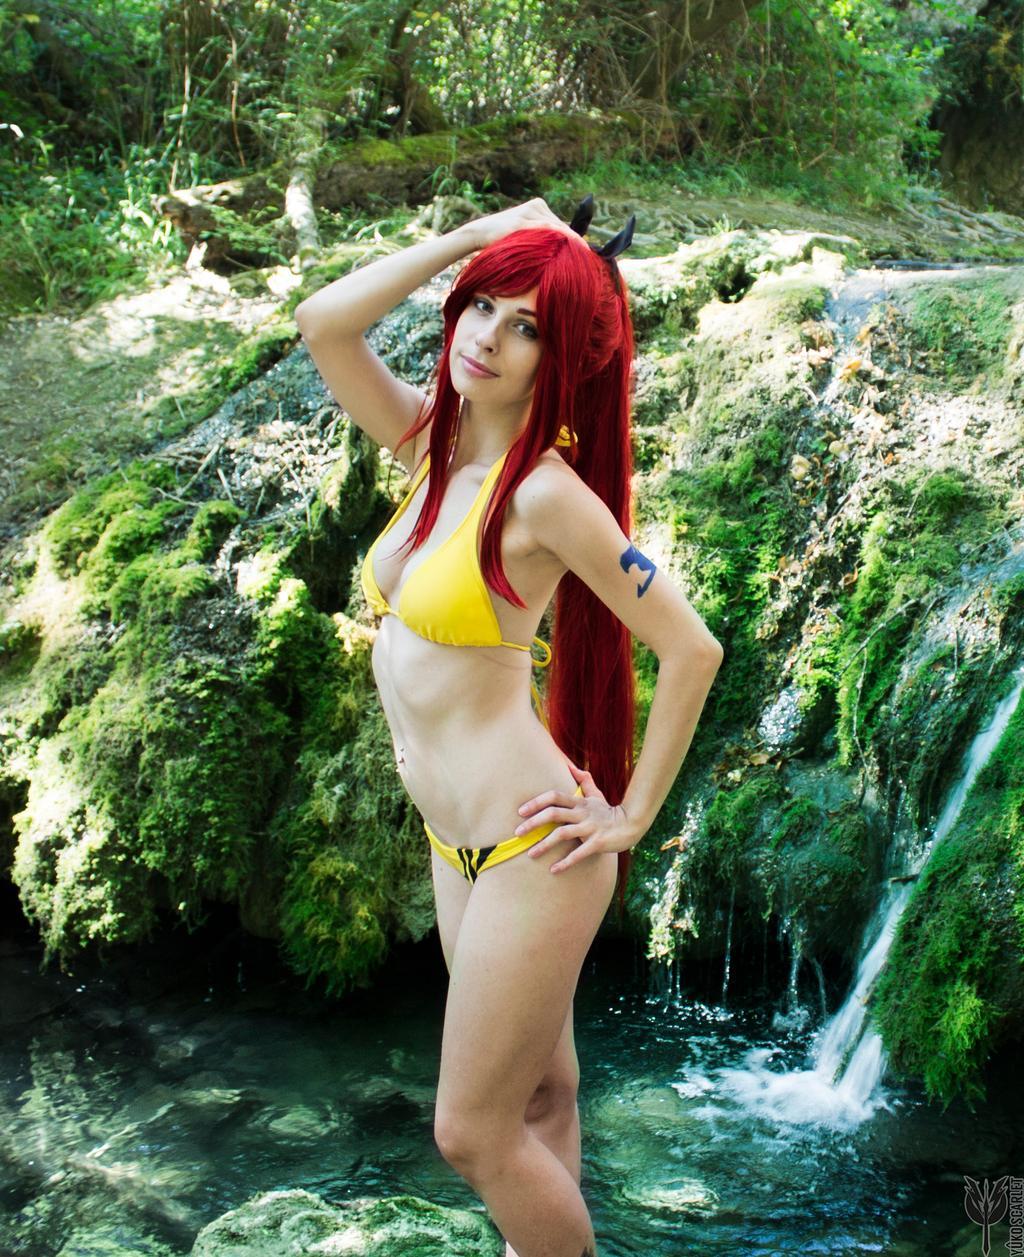 70+ Hot Pictures Of Erza Scarlet from Fairy Tale Which Will Leave You Dumbstruck 221